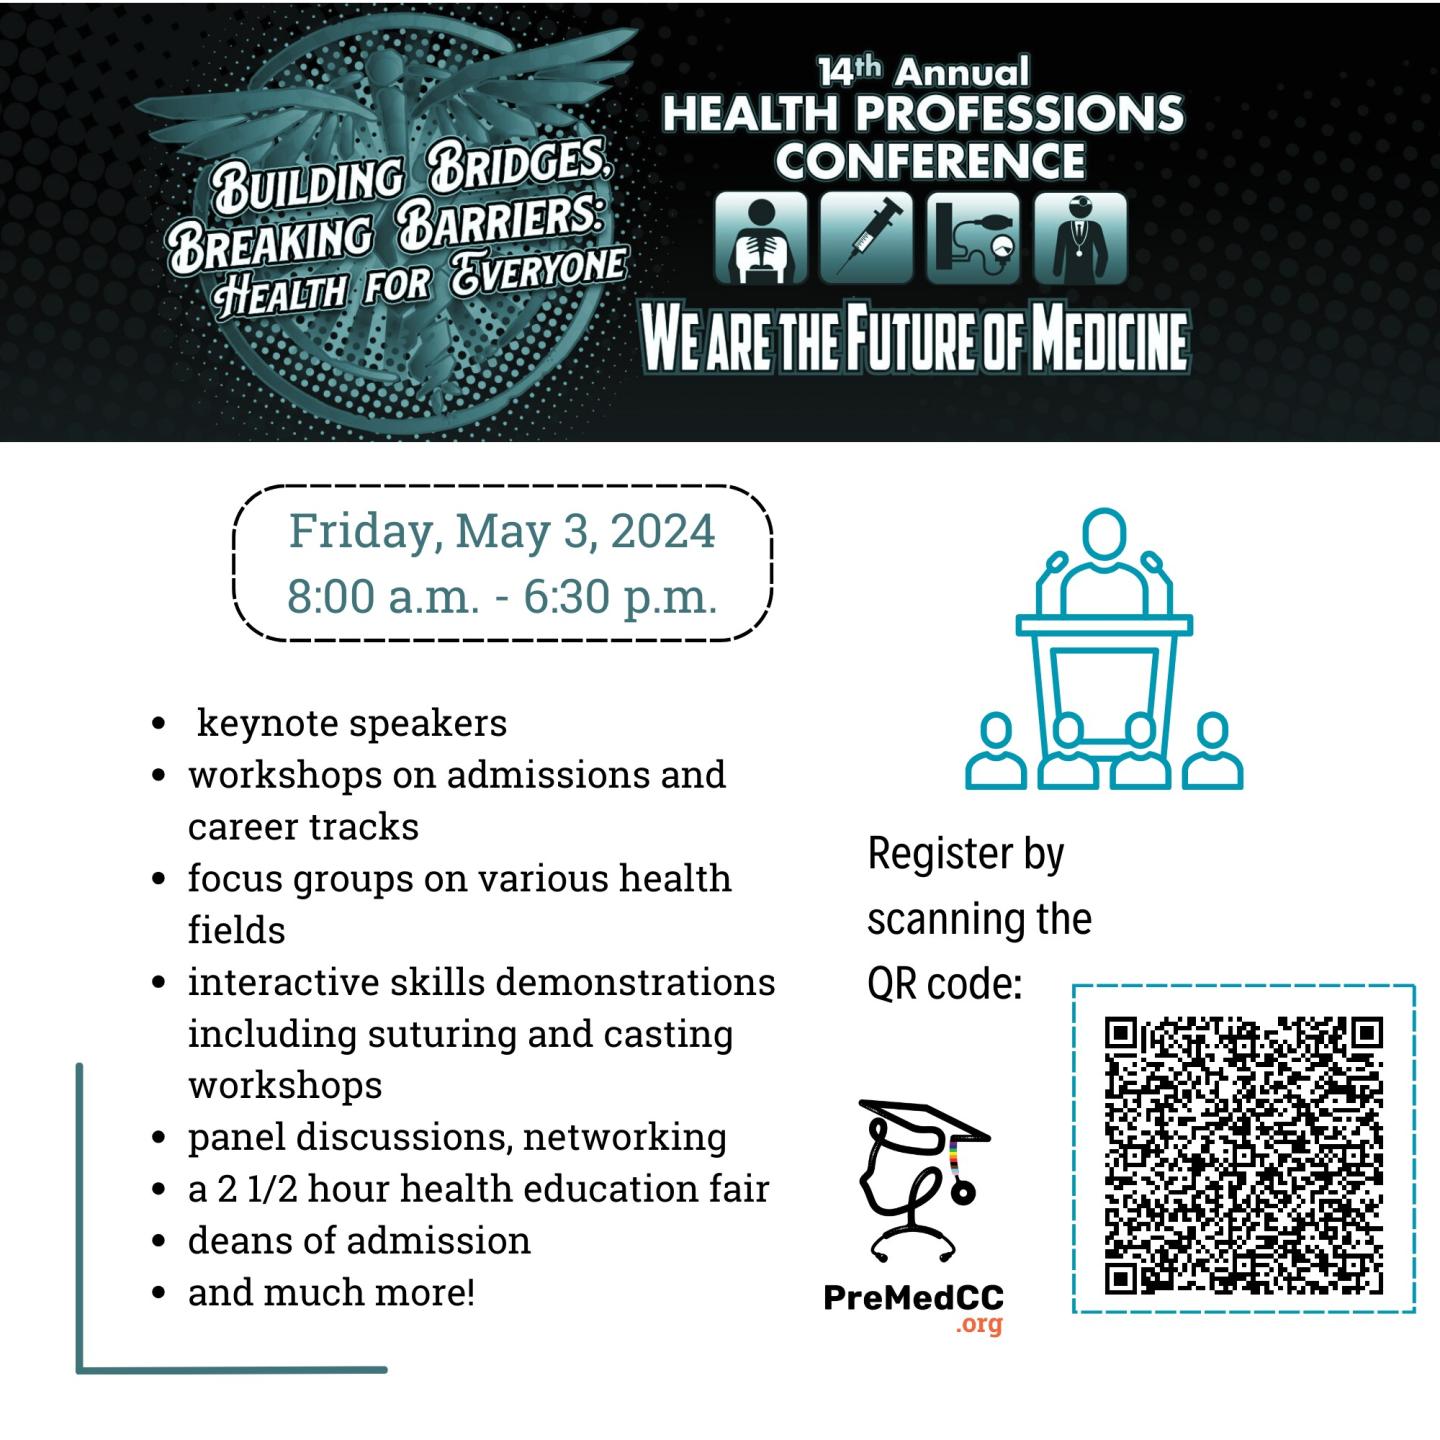 Health Professions Conference